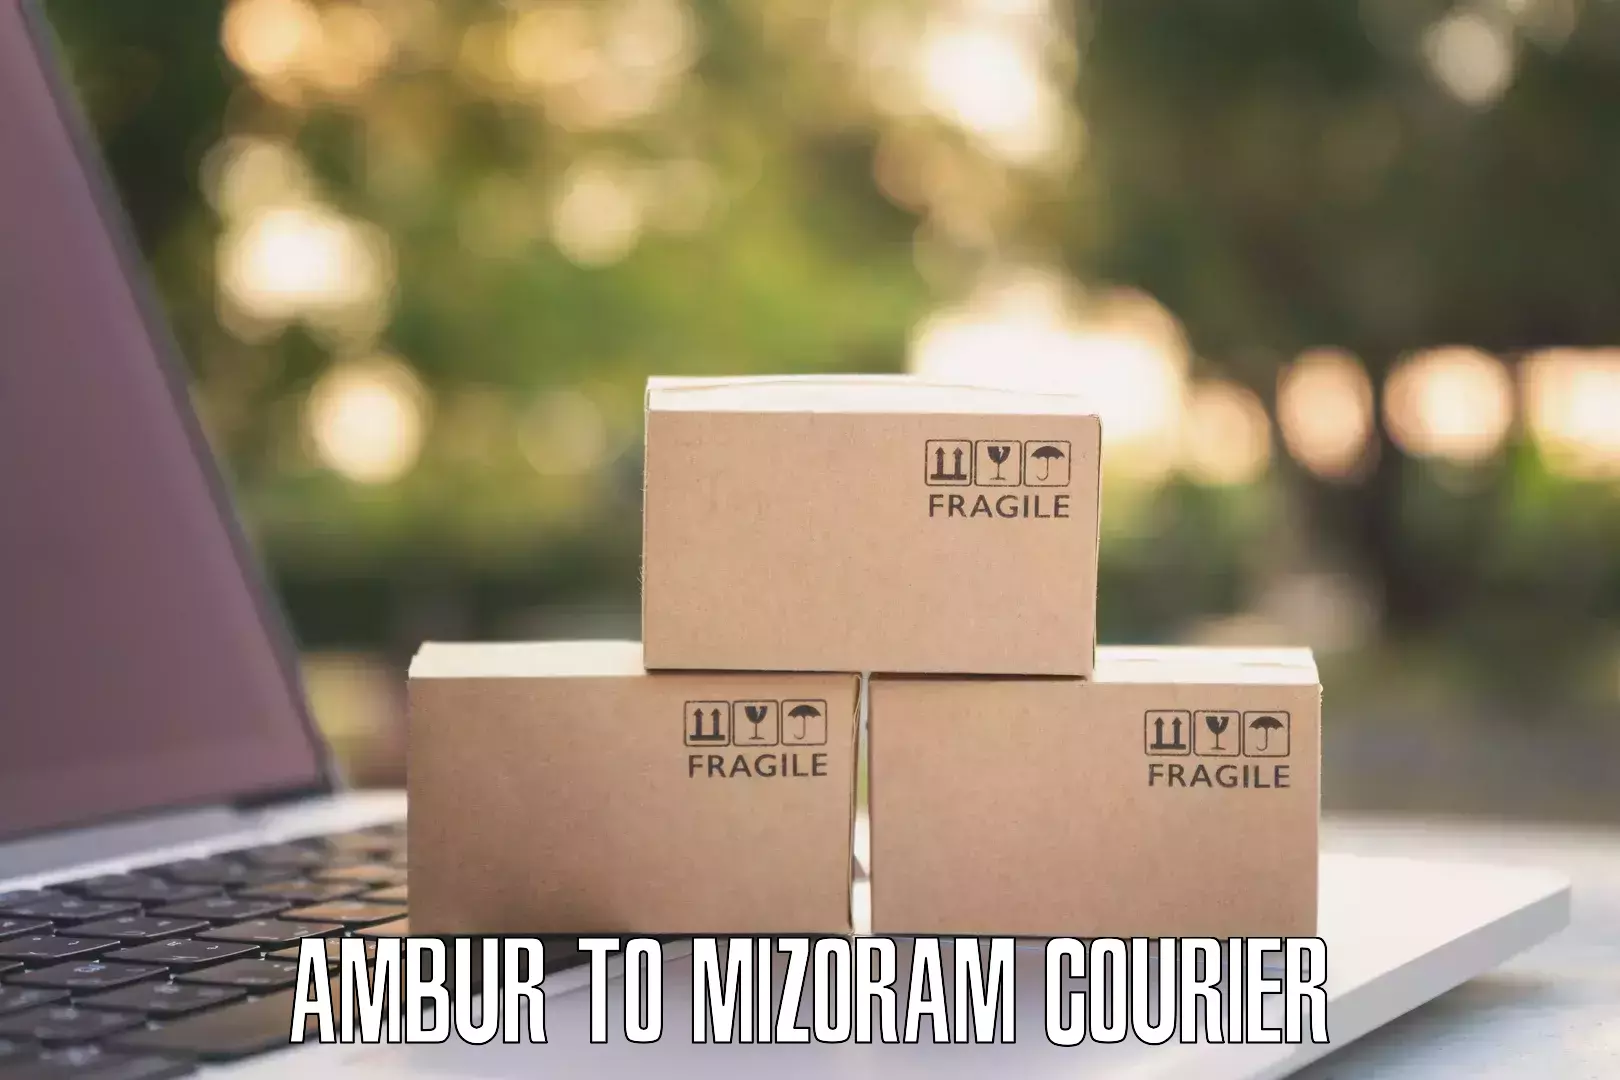 Next-day delivery options Ambur to Aizawl